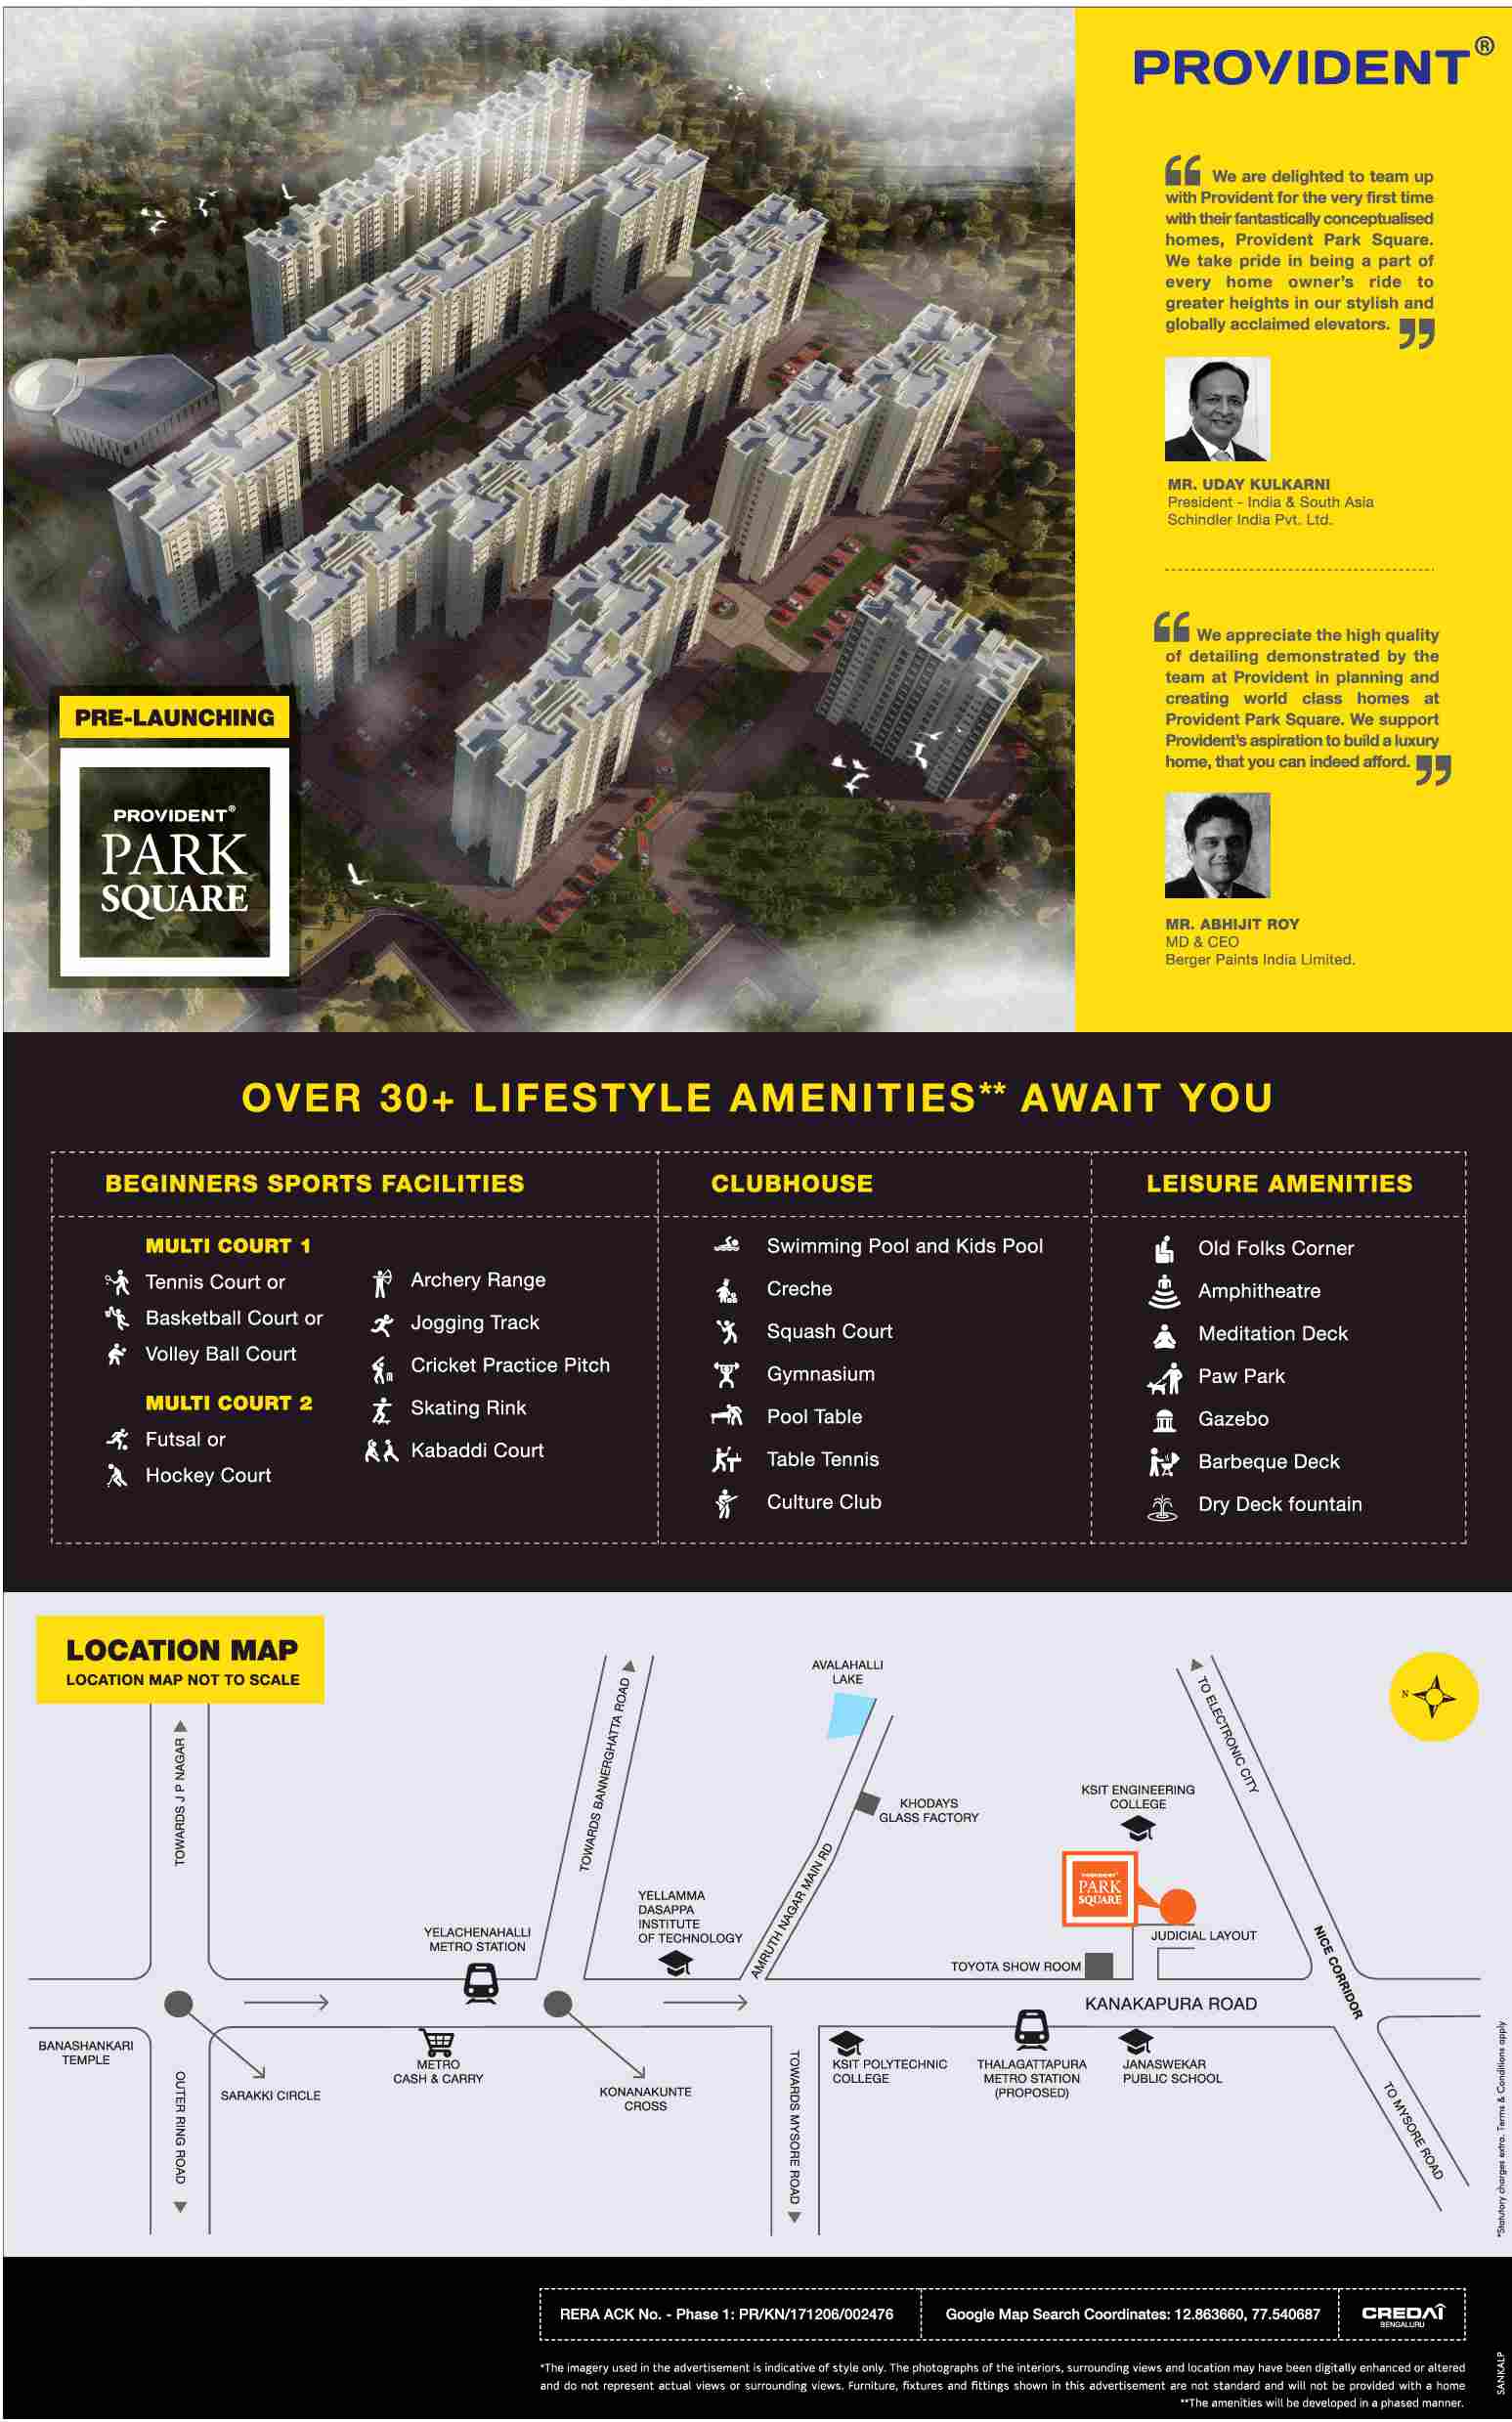 Over 30+ lifestyle amenities awaits you at Provident Park Square in Bangalore